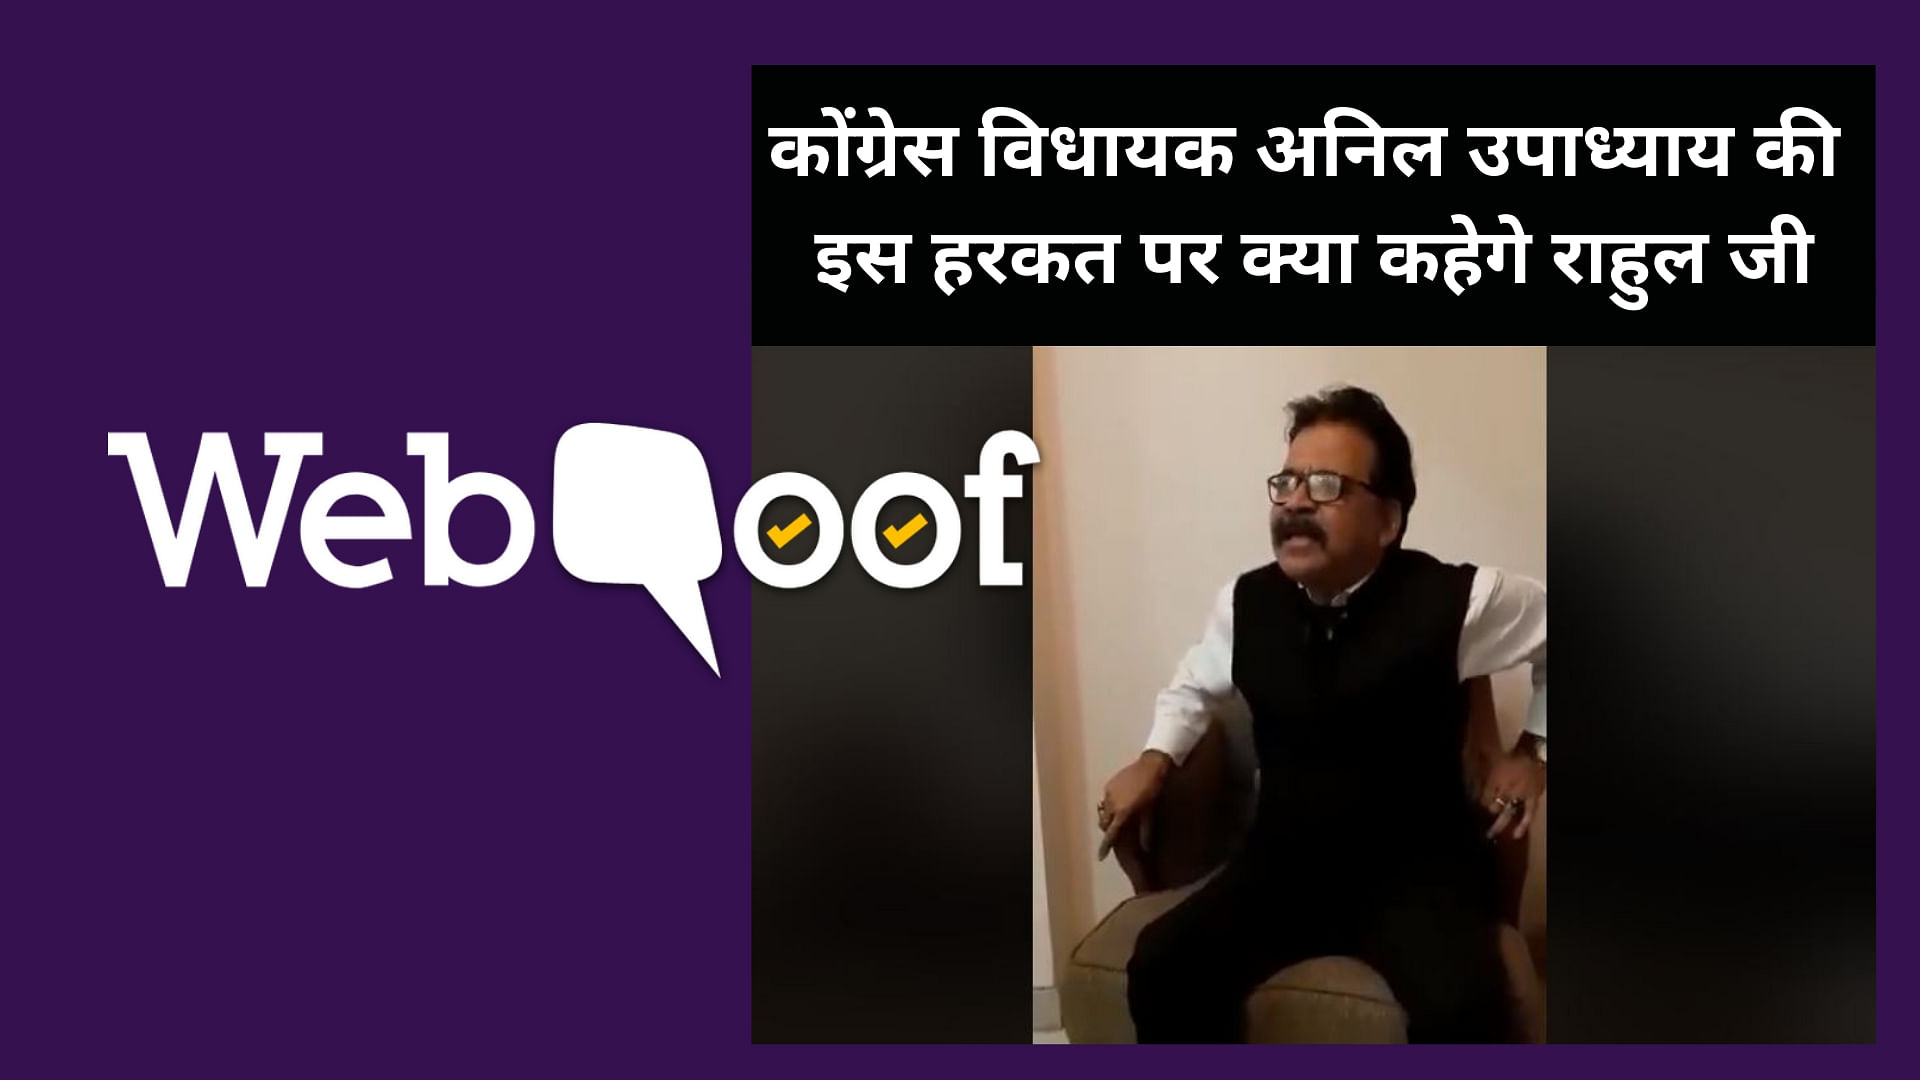 A video went viral falsely claimed Congress MLA Anil Upadhyay ‘supported’ the achievements of Modi-government.